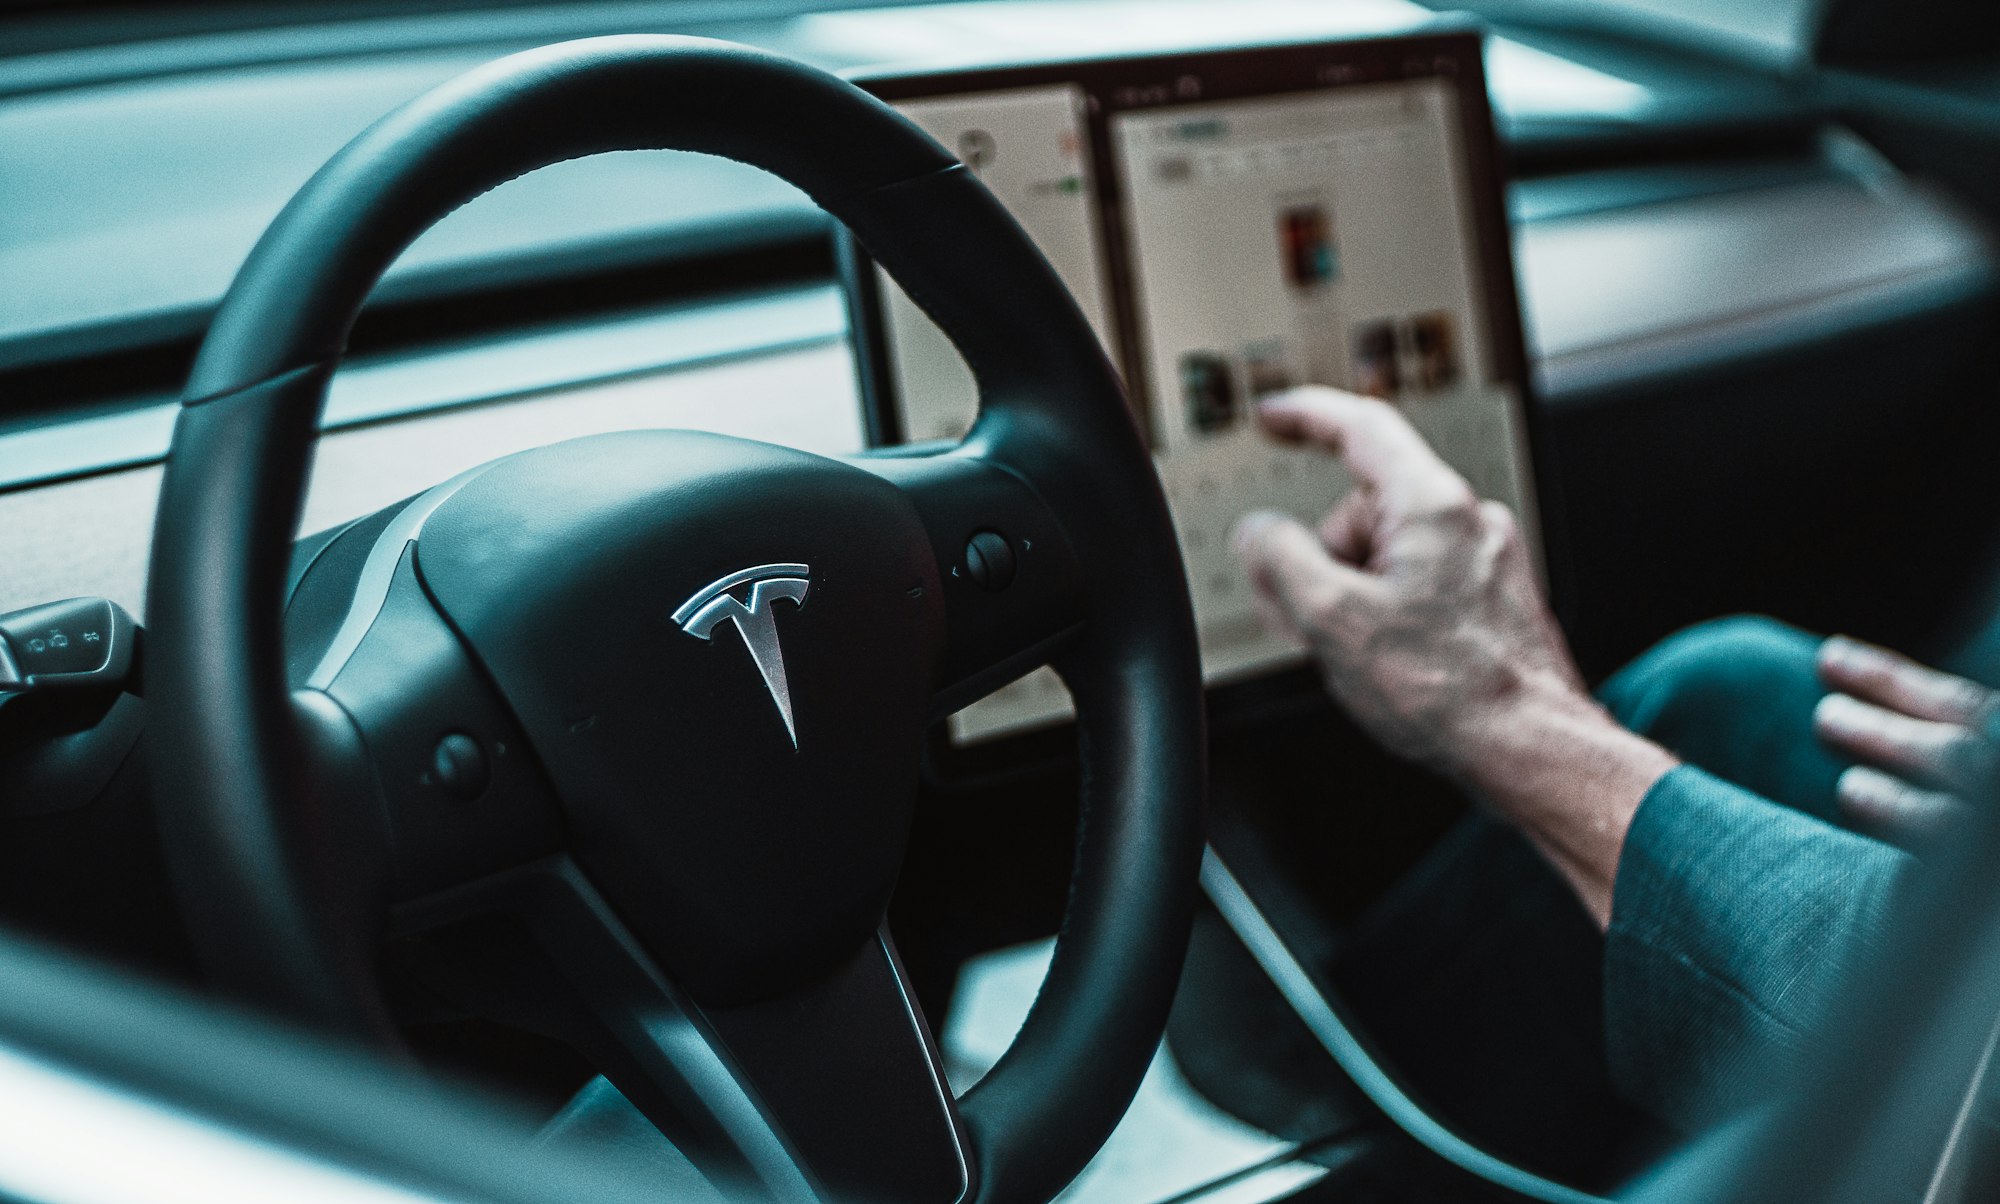 Tesla's ride-hailing mobile app will feature a 3D map, music and temperature controls